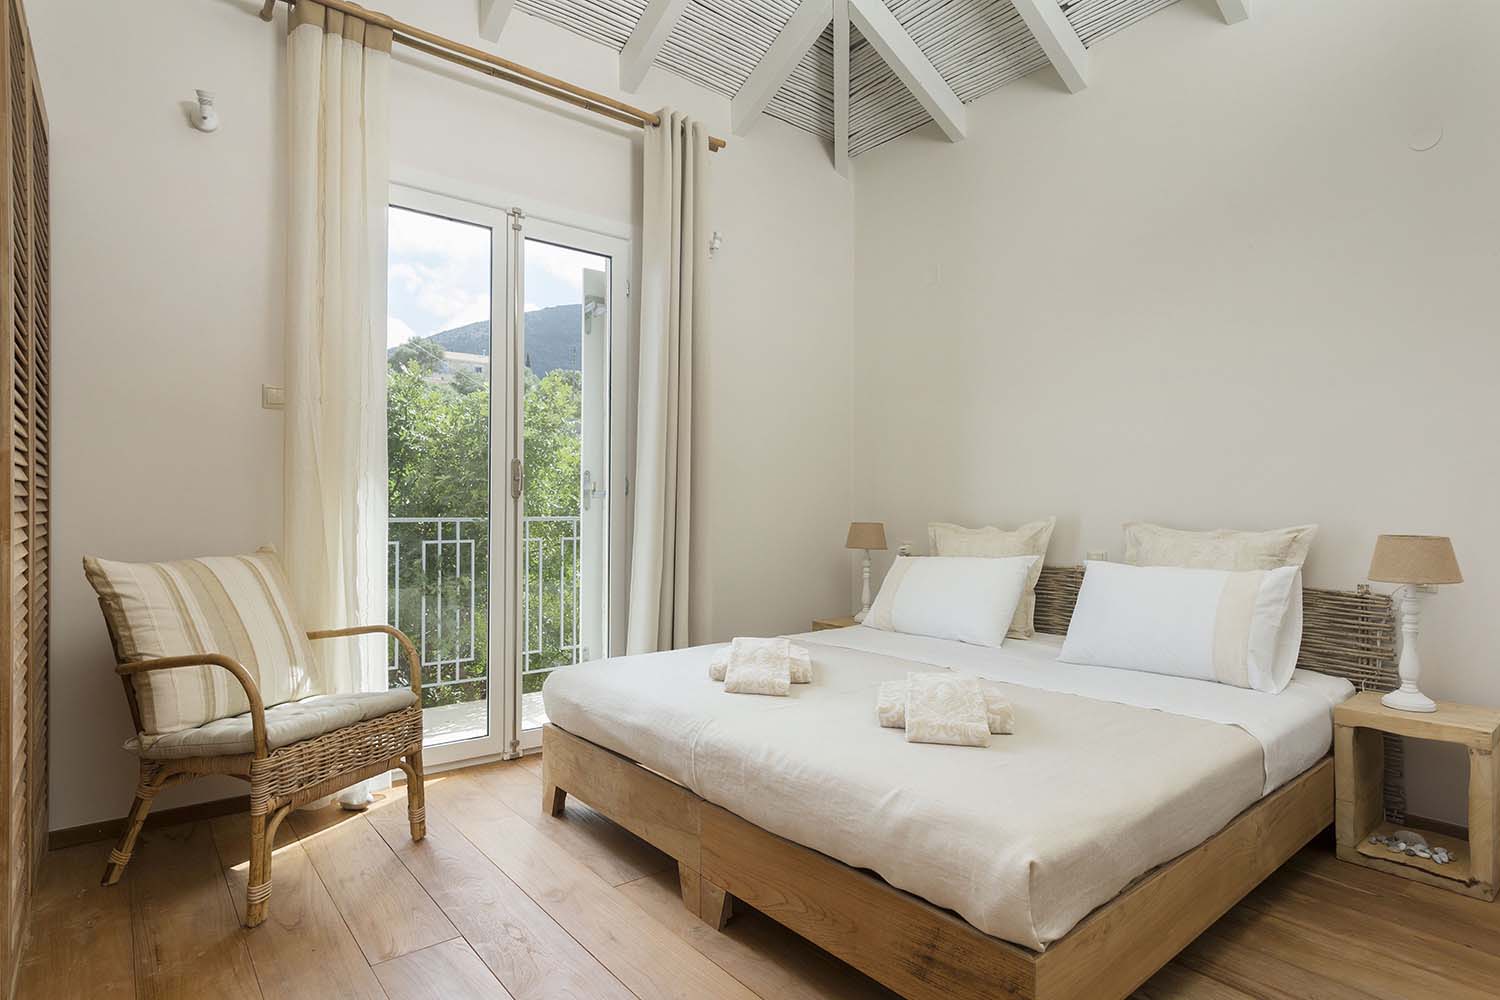 Bedroom of house for sale in Ithaca Greece, Ag. Saranda